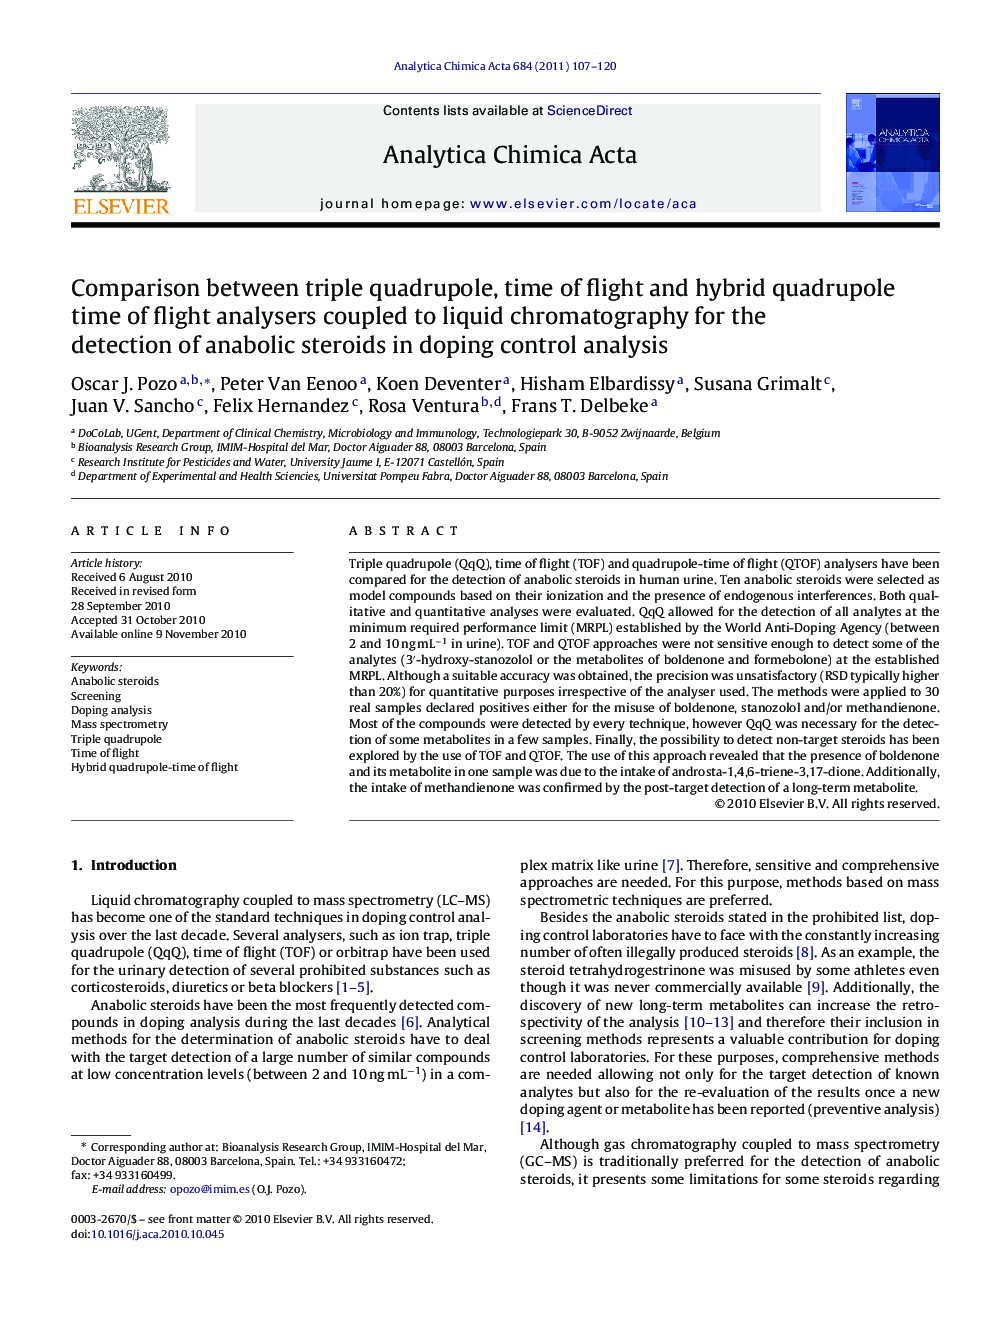 Comparison between triple quadrupole, time of flight and hybrid quadrupole time of flight analysers coupled to liquid chromatography for the detection of anabolic steroids in doping control analysis